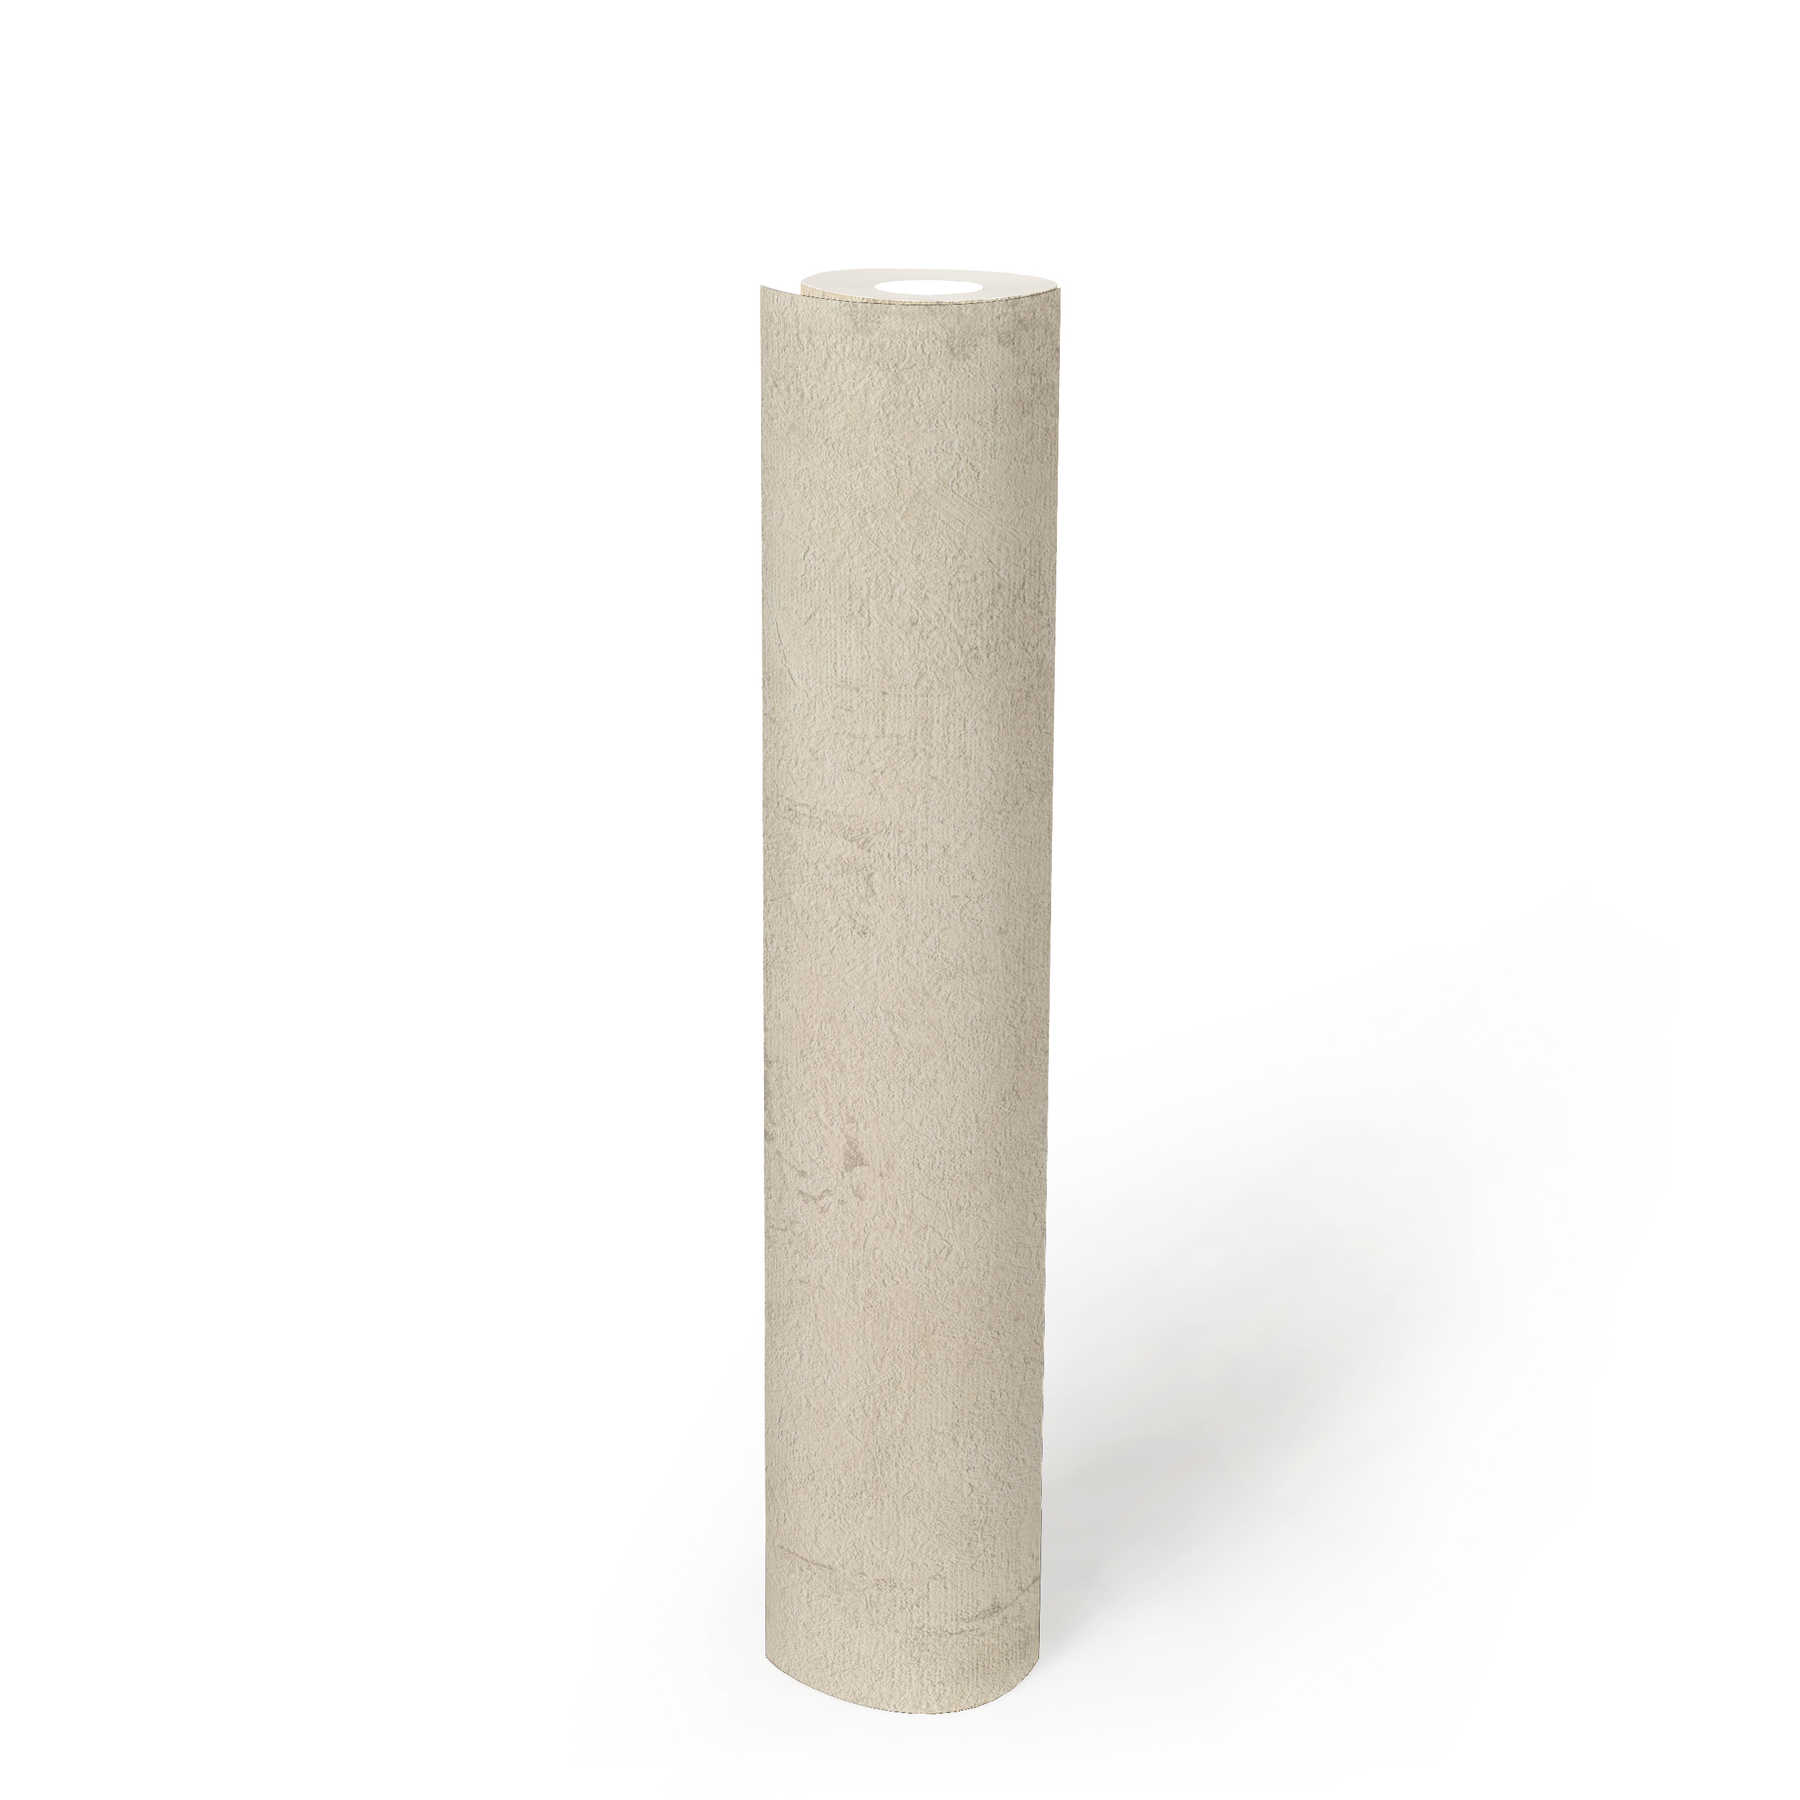             Textured wallpaper with plaster look and colour hatching - cream, grey
        